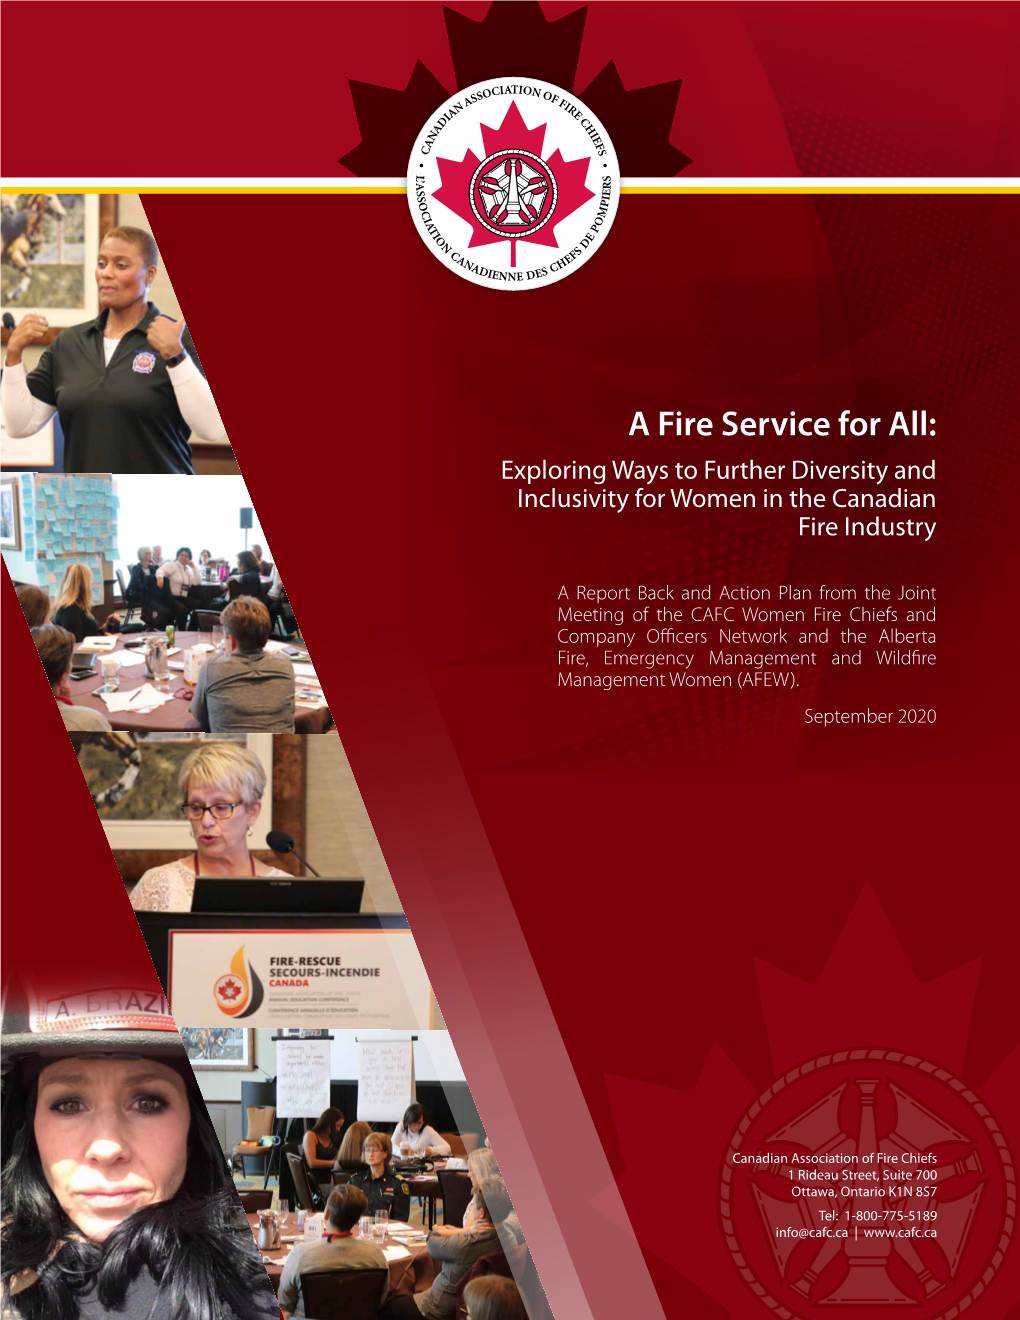 A Fire Service for All: Exploring Ways to Further Diversity and Inclusivity for Women in the Canadian Fire Industry